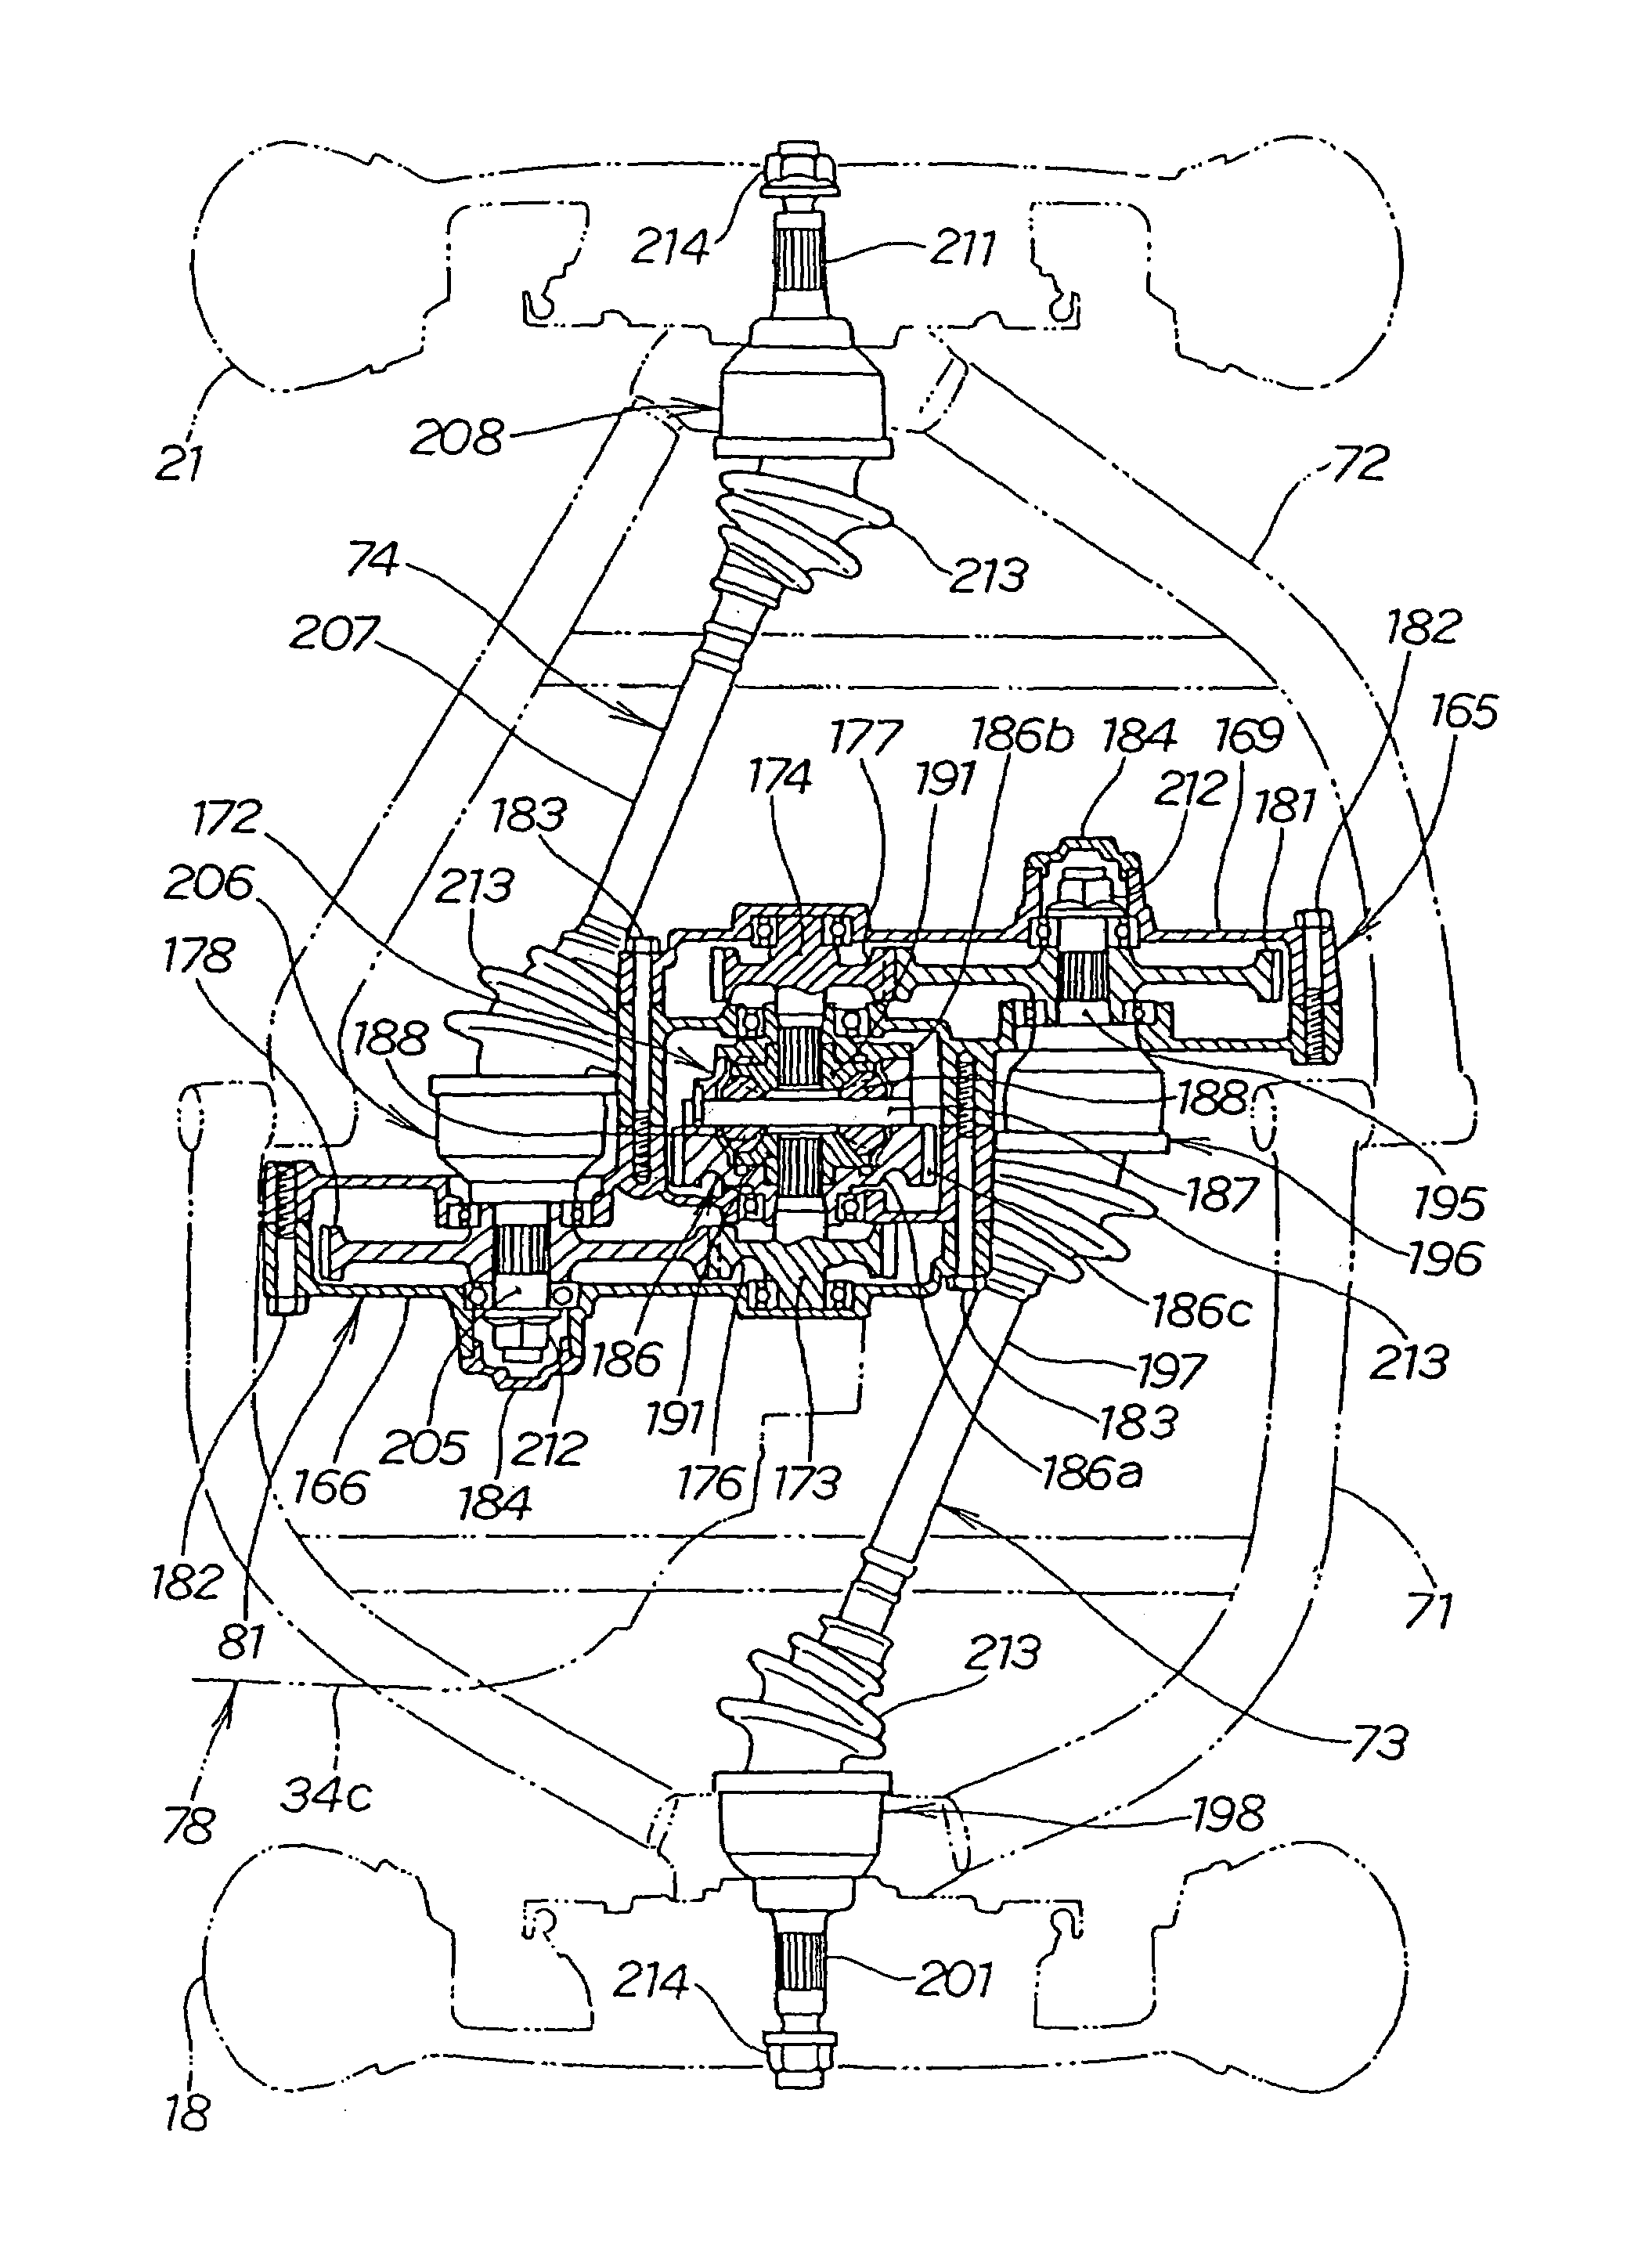 Reinforcing support structure for a three-wheeled motor vehicle, and three-wheeled motor vehicle incorporating same